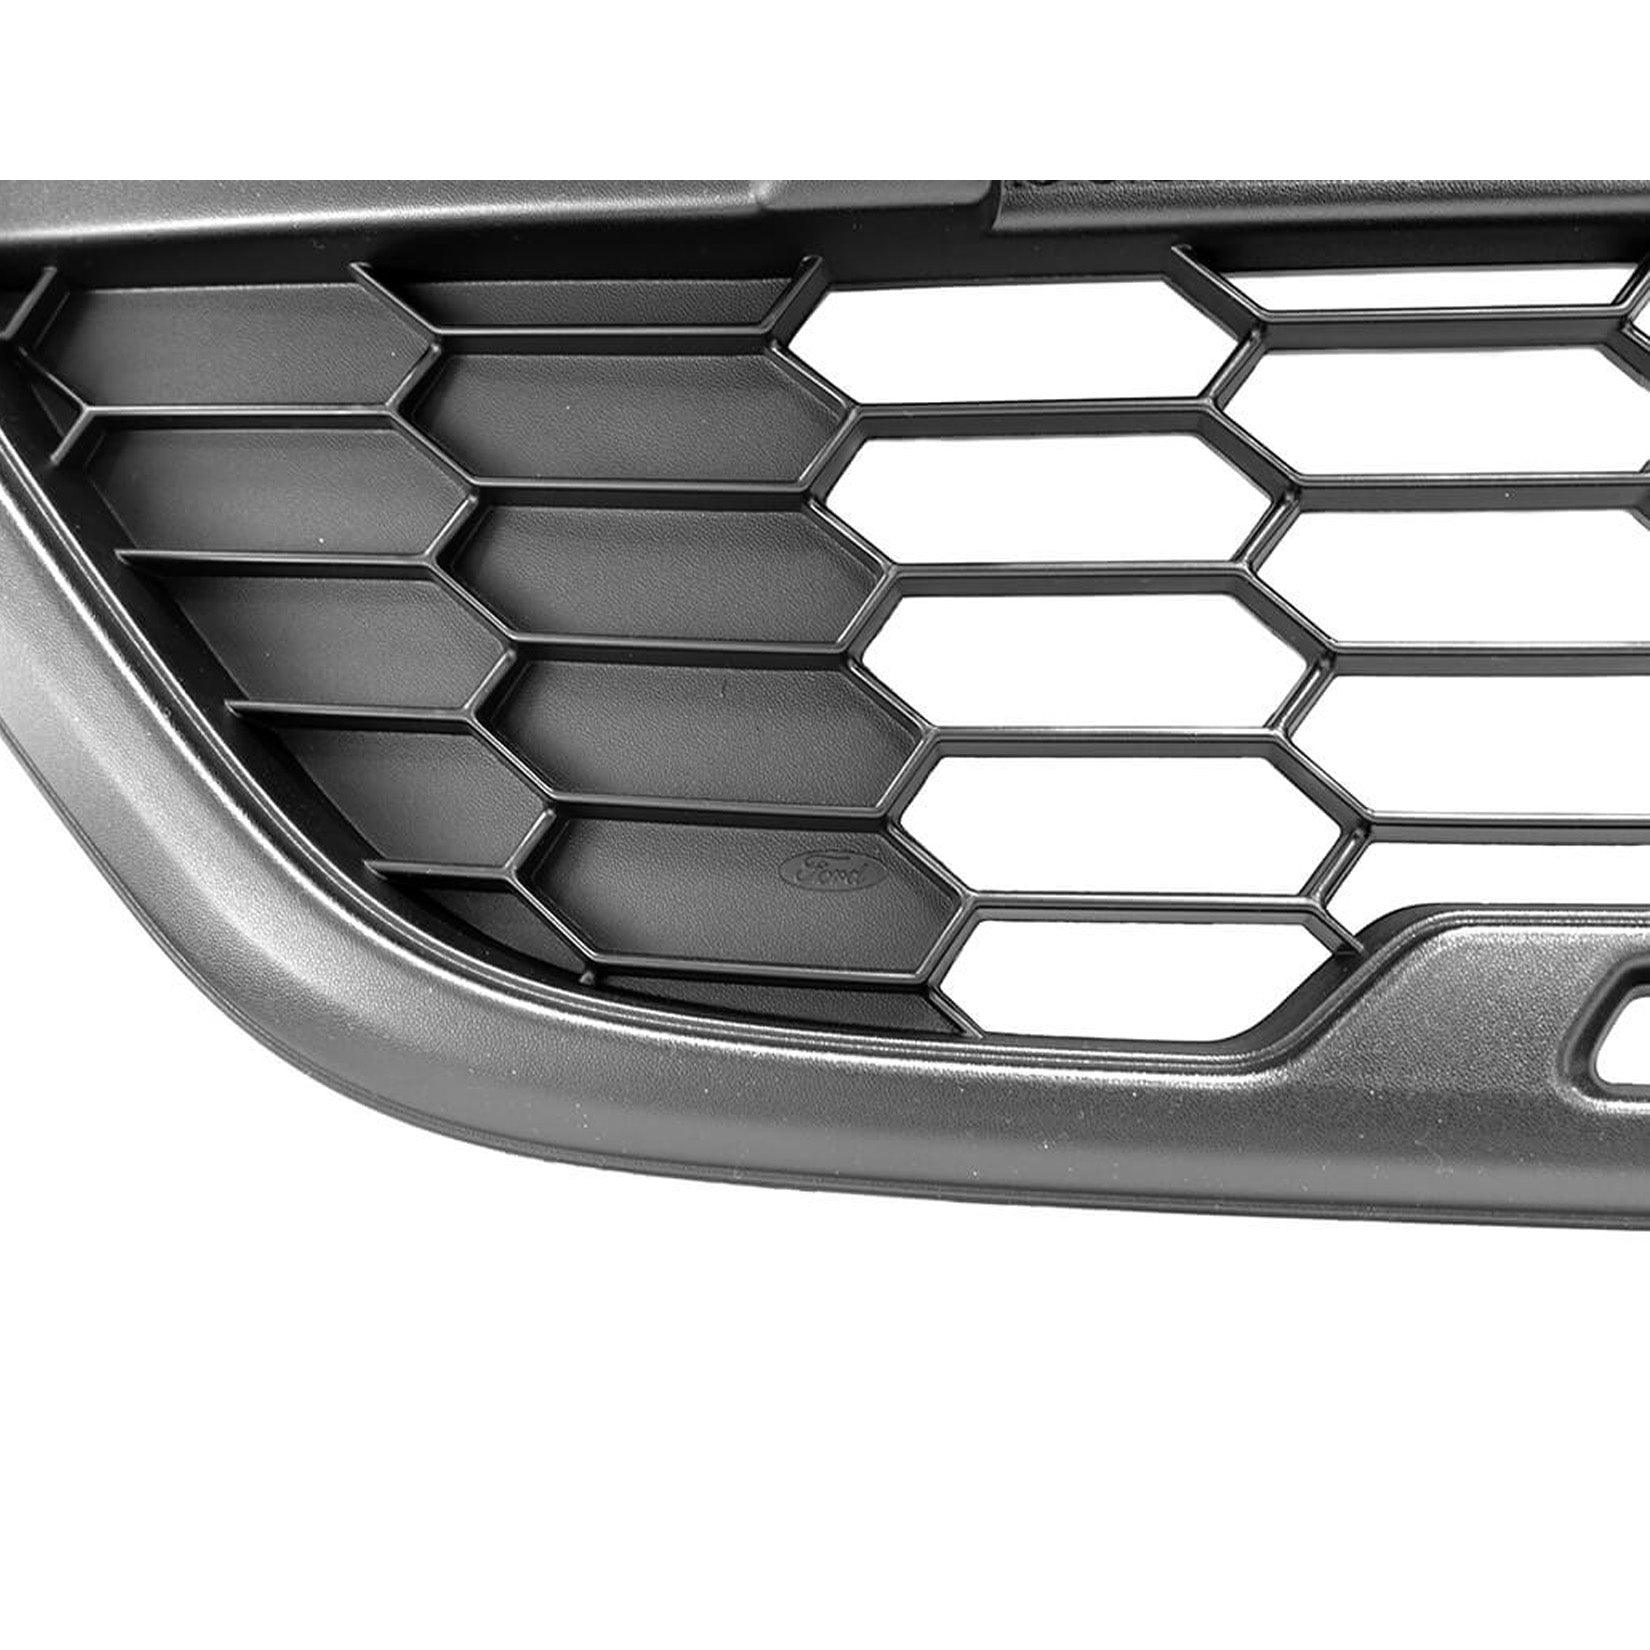 FORD TRANSIT CUSTOM 2018 ON – GENUINE FRONT RAPTOR STYLE GRILLE - RisperStyling